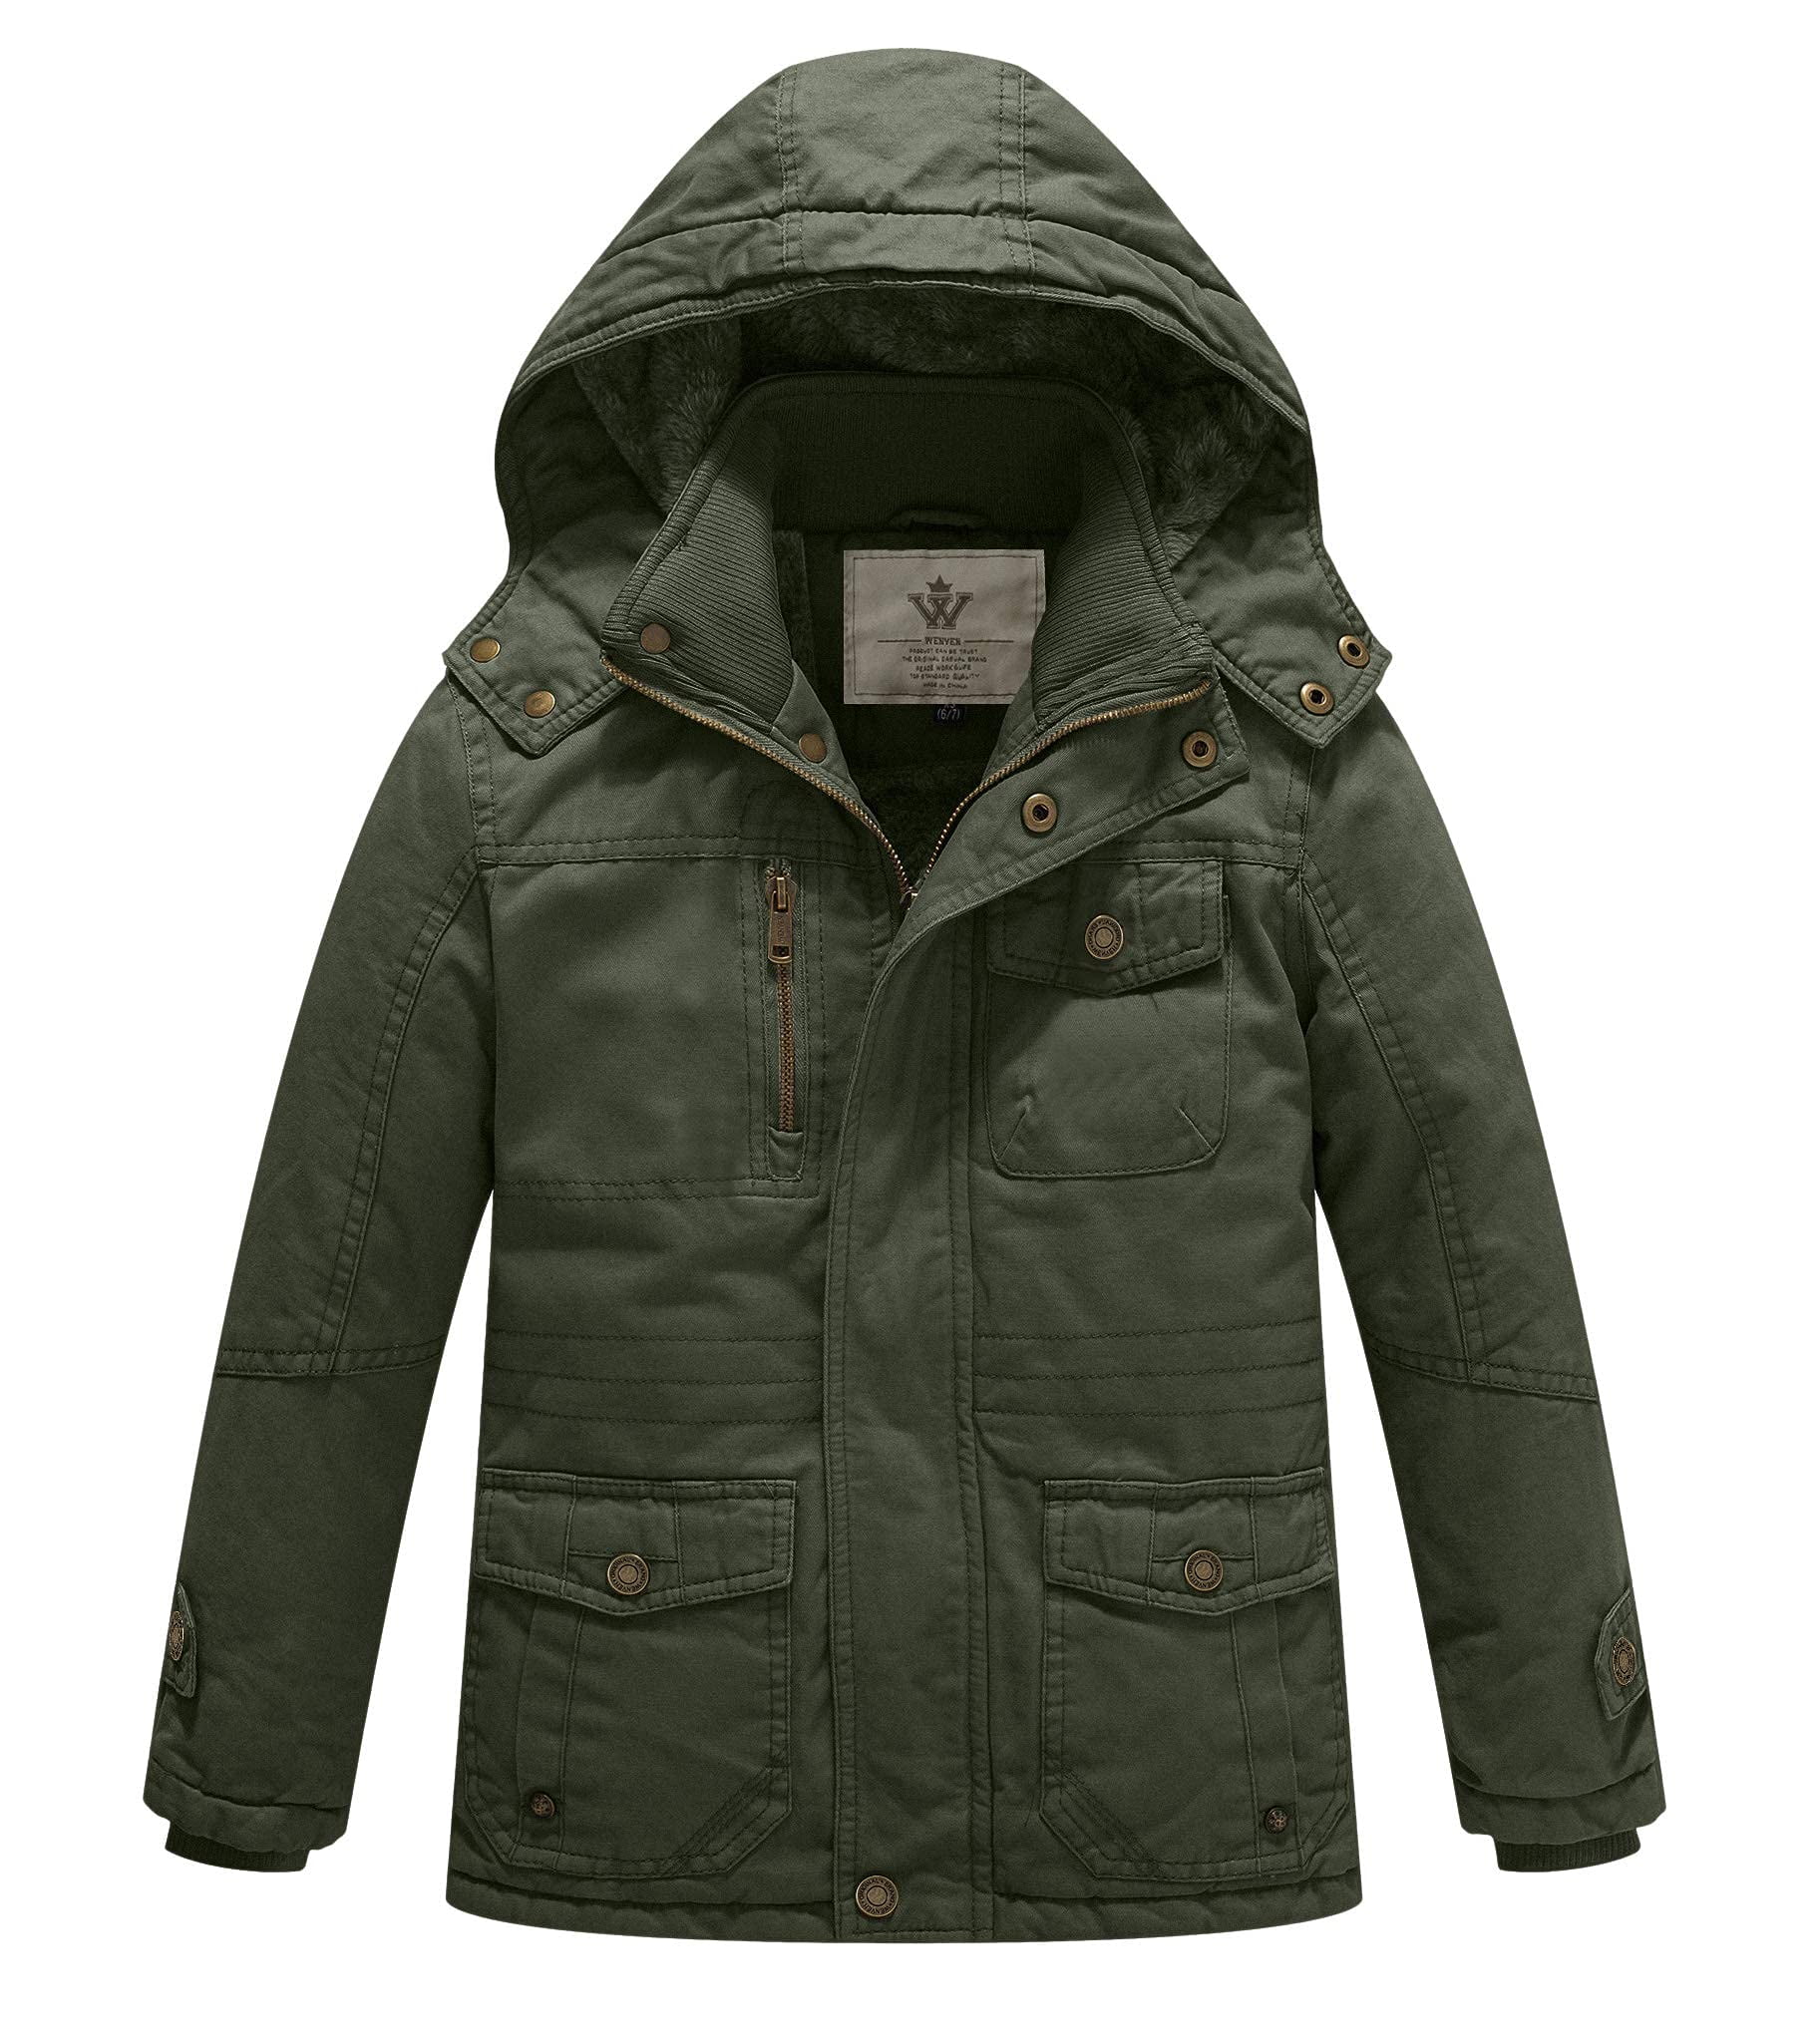 WenVen Girls Thicken Jacket Cotton Coat with Removable Hood